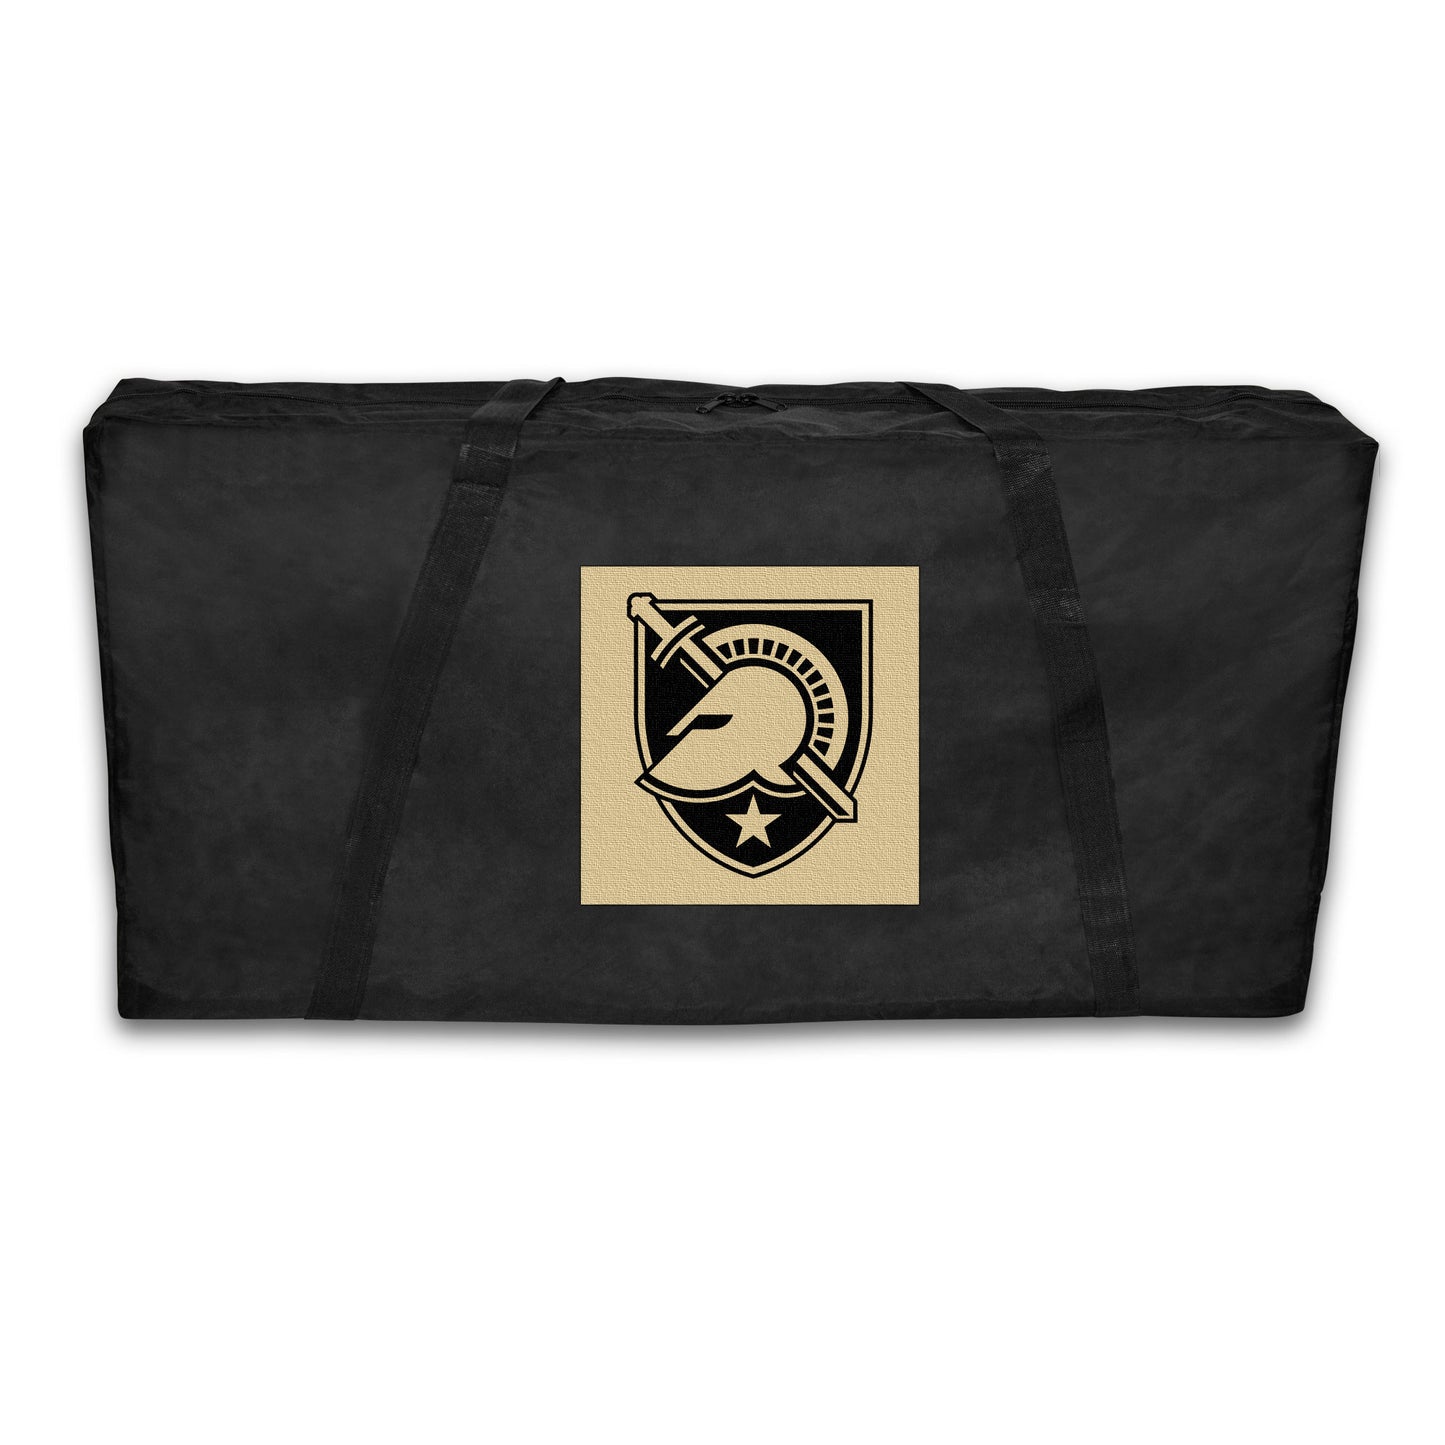 Army Black Knights Cornhole Carrying Case